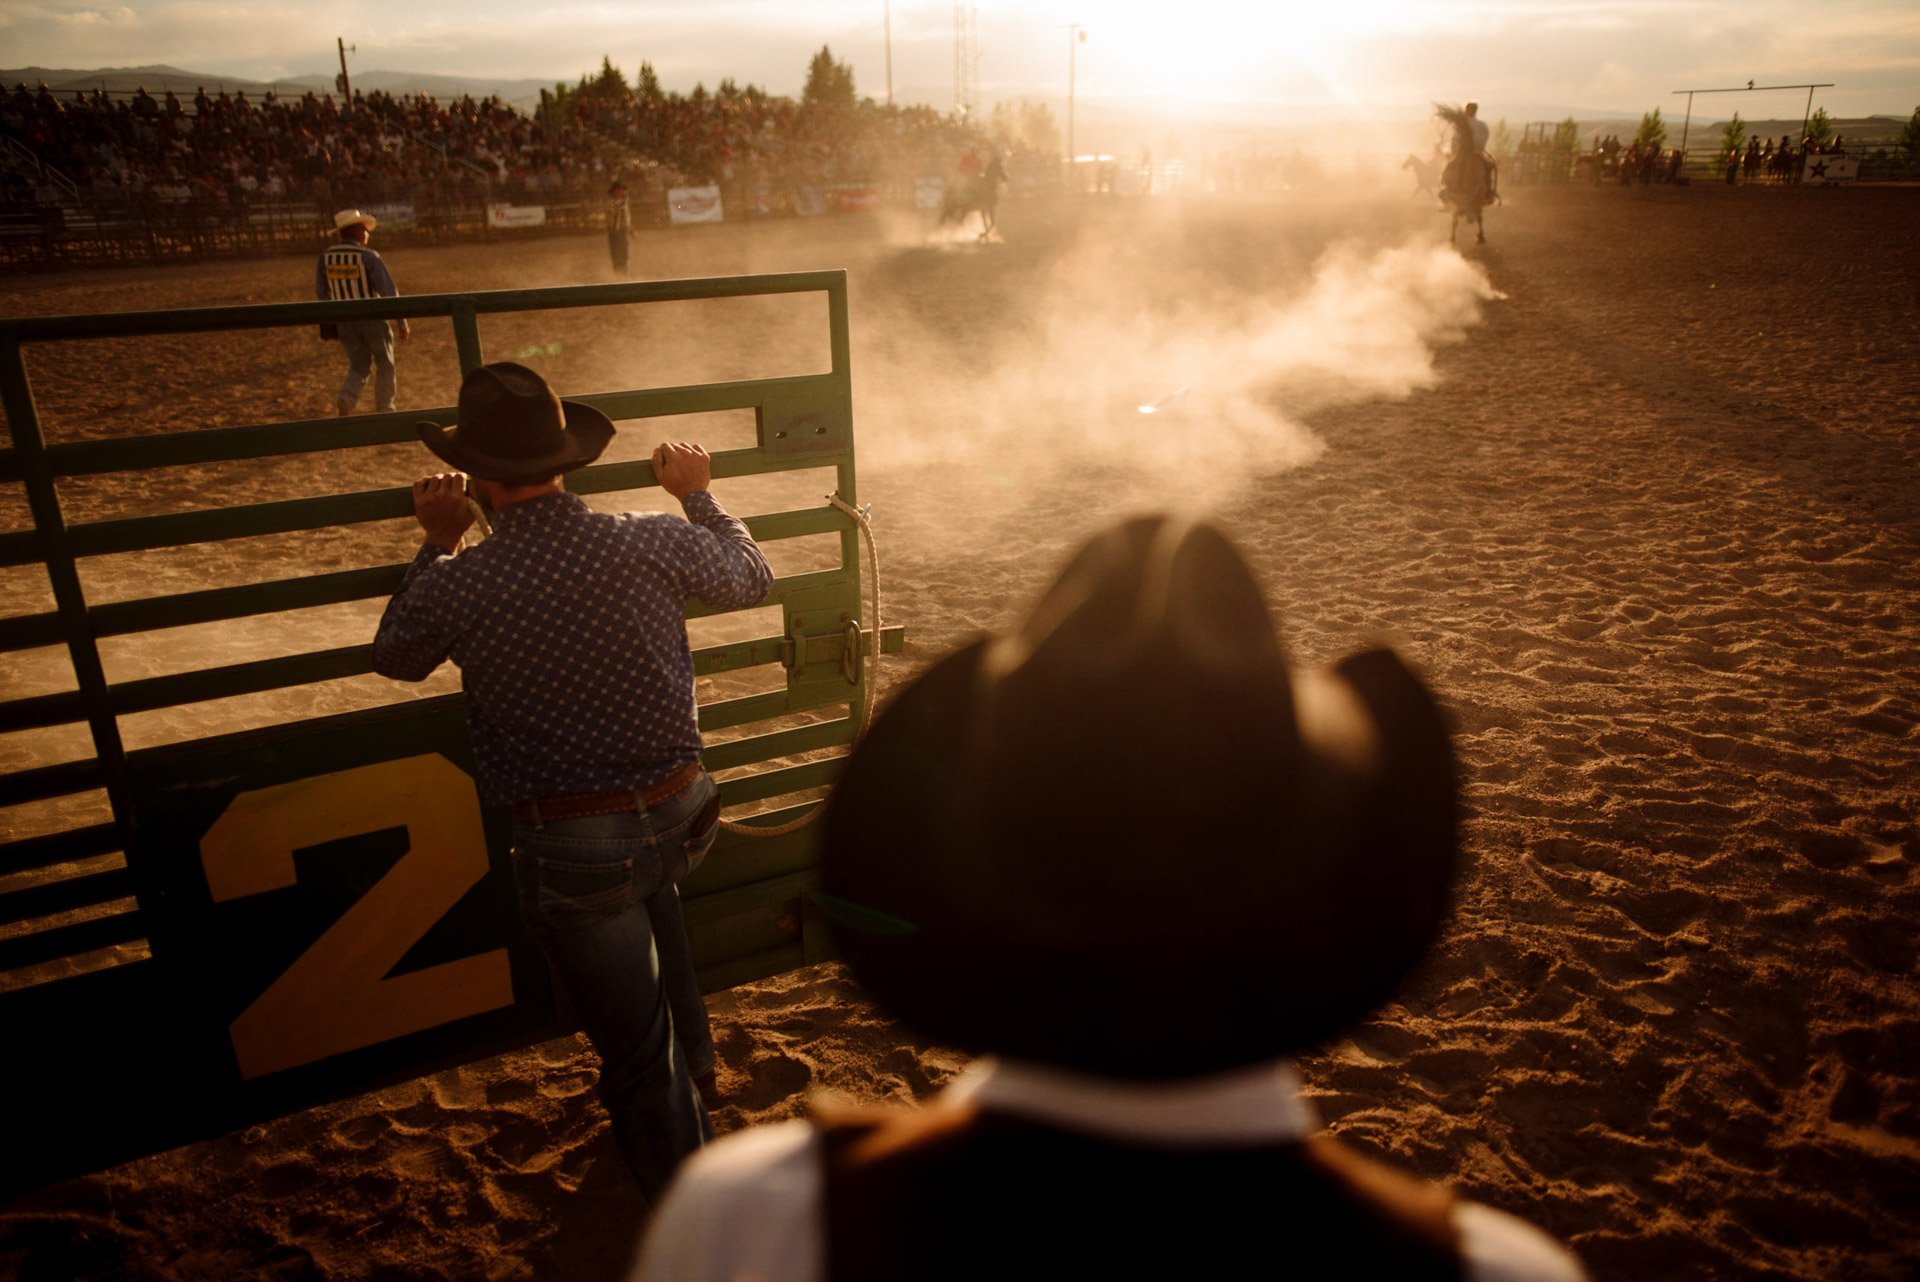 JH-commercial-western-rodeo-photographer-32.jpg